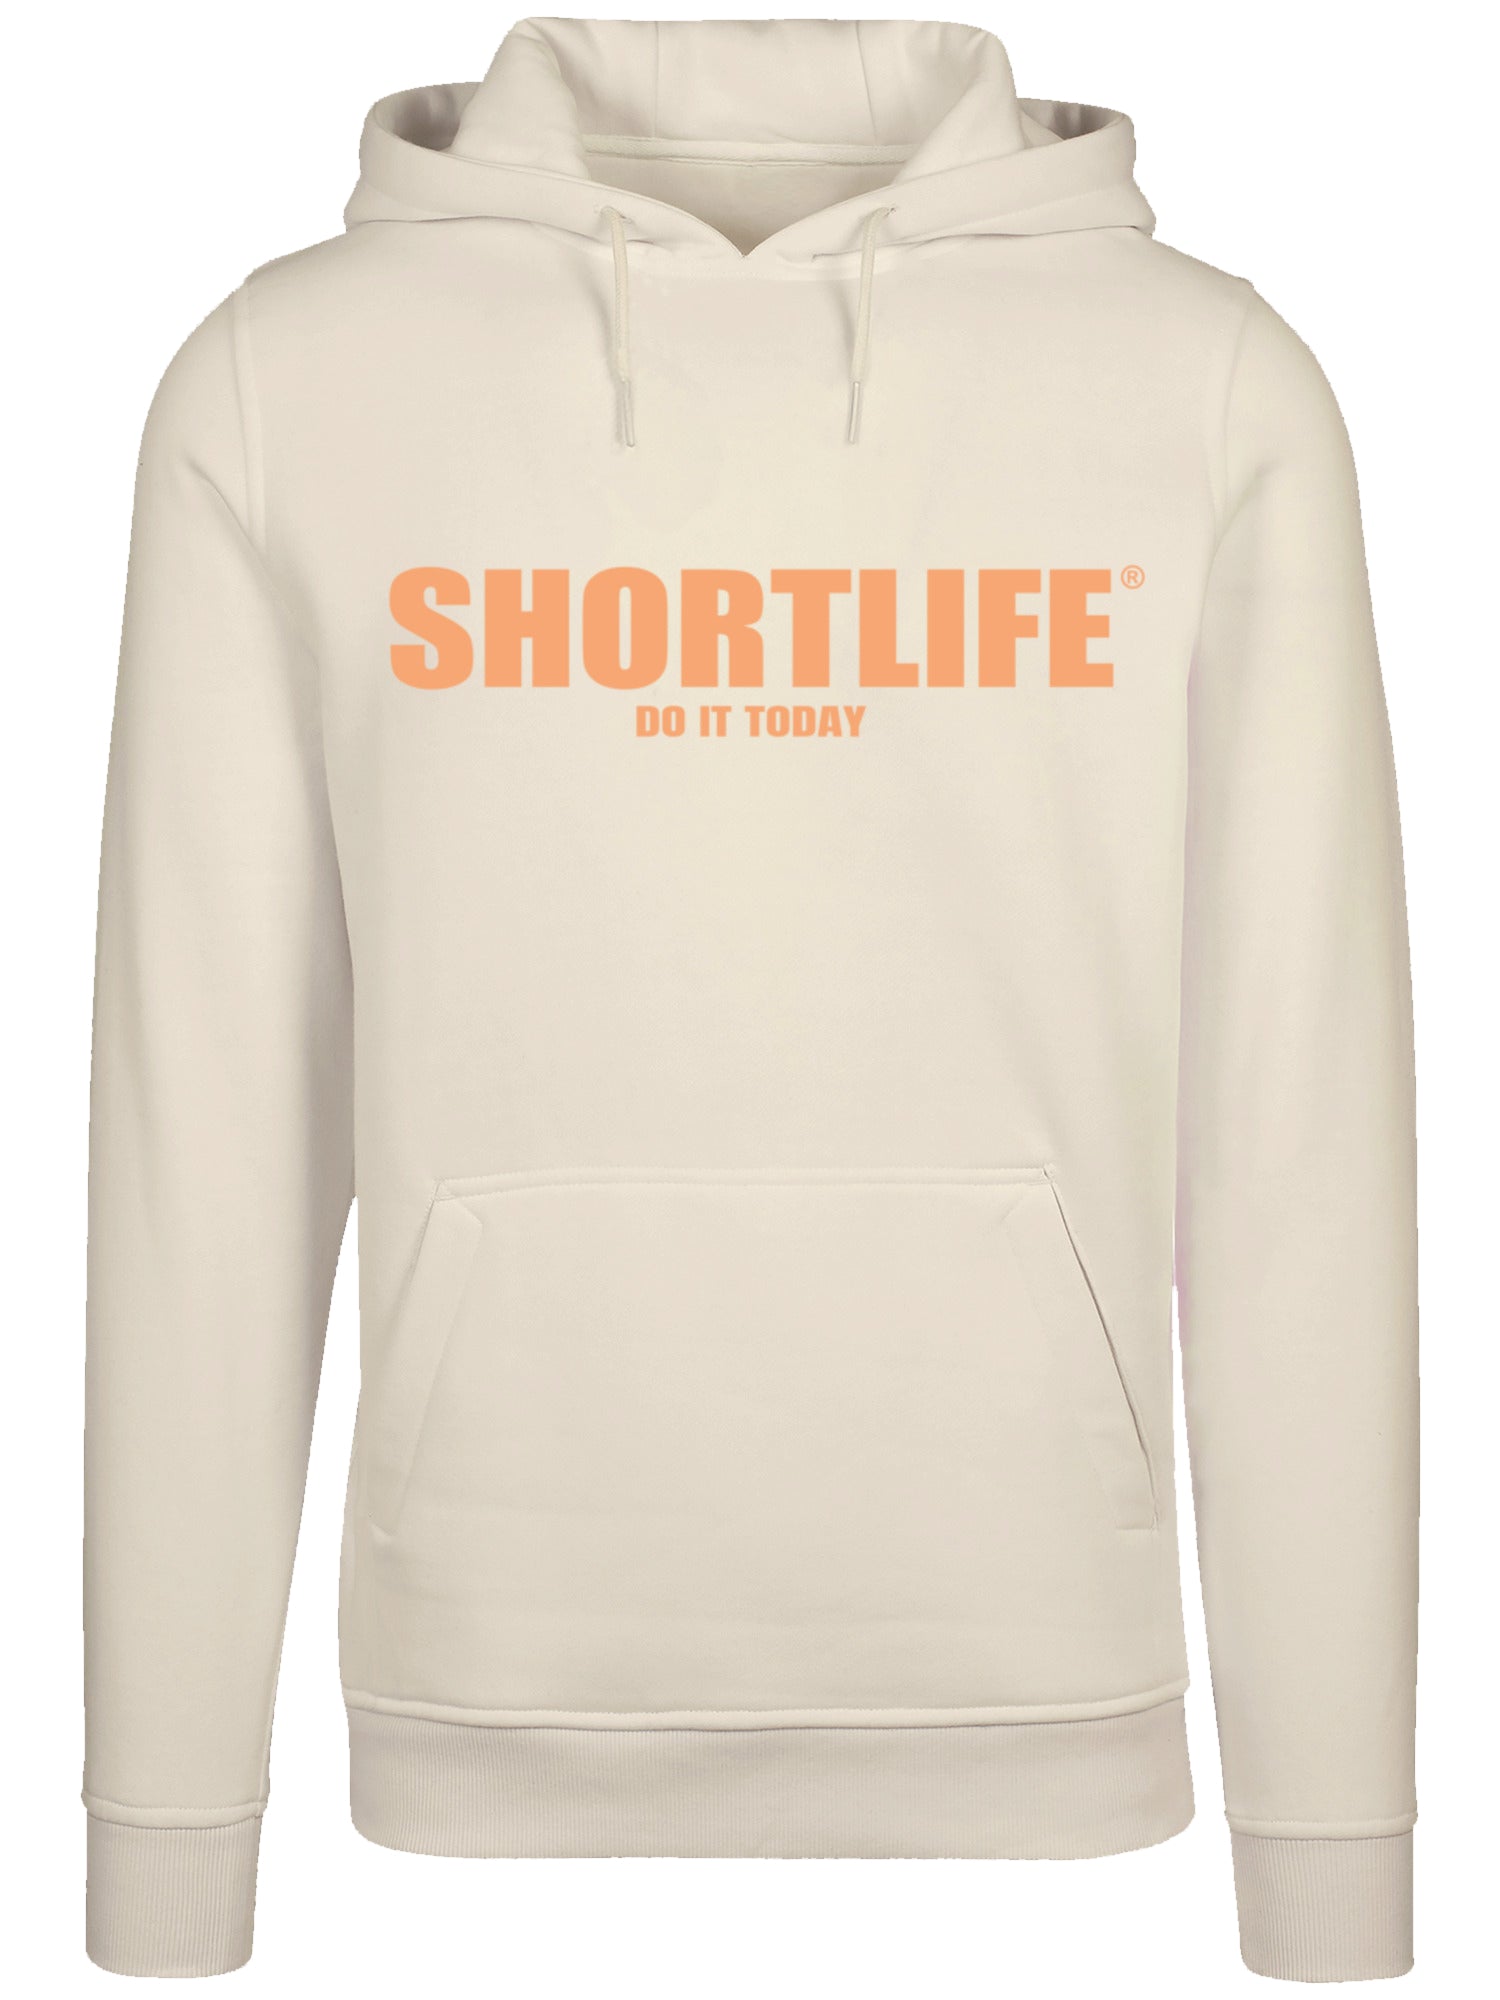 Chic Shortlife orange and Quote orange with Fitted heavy hoody